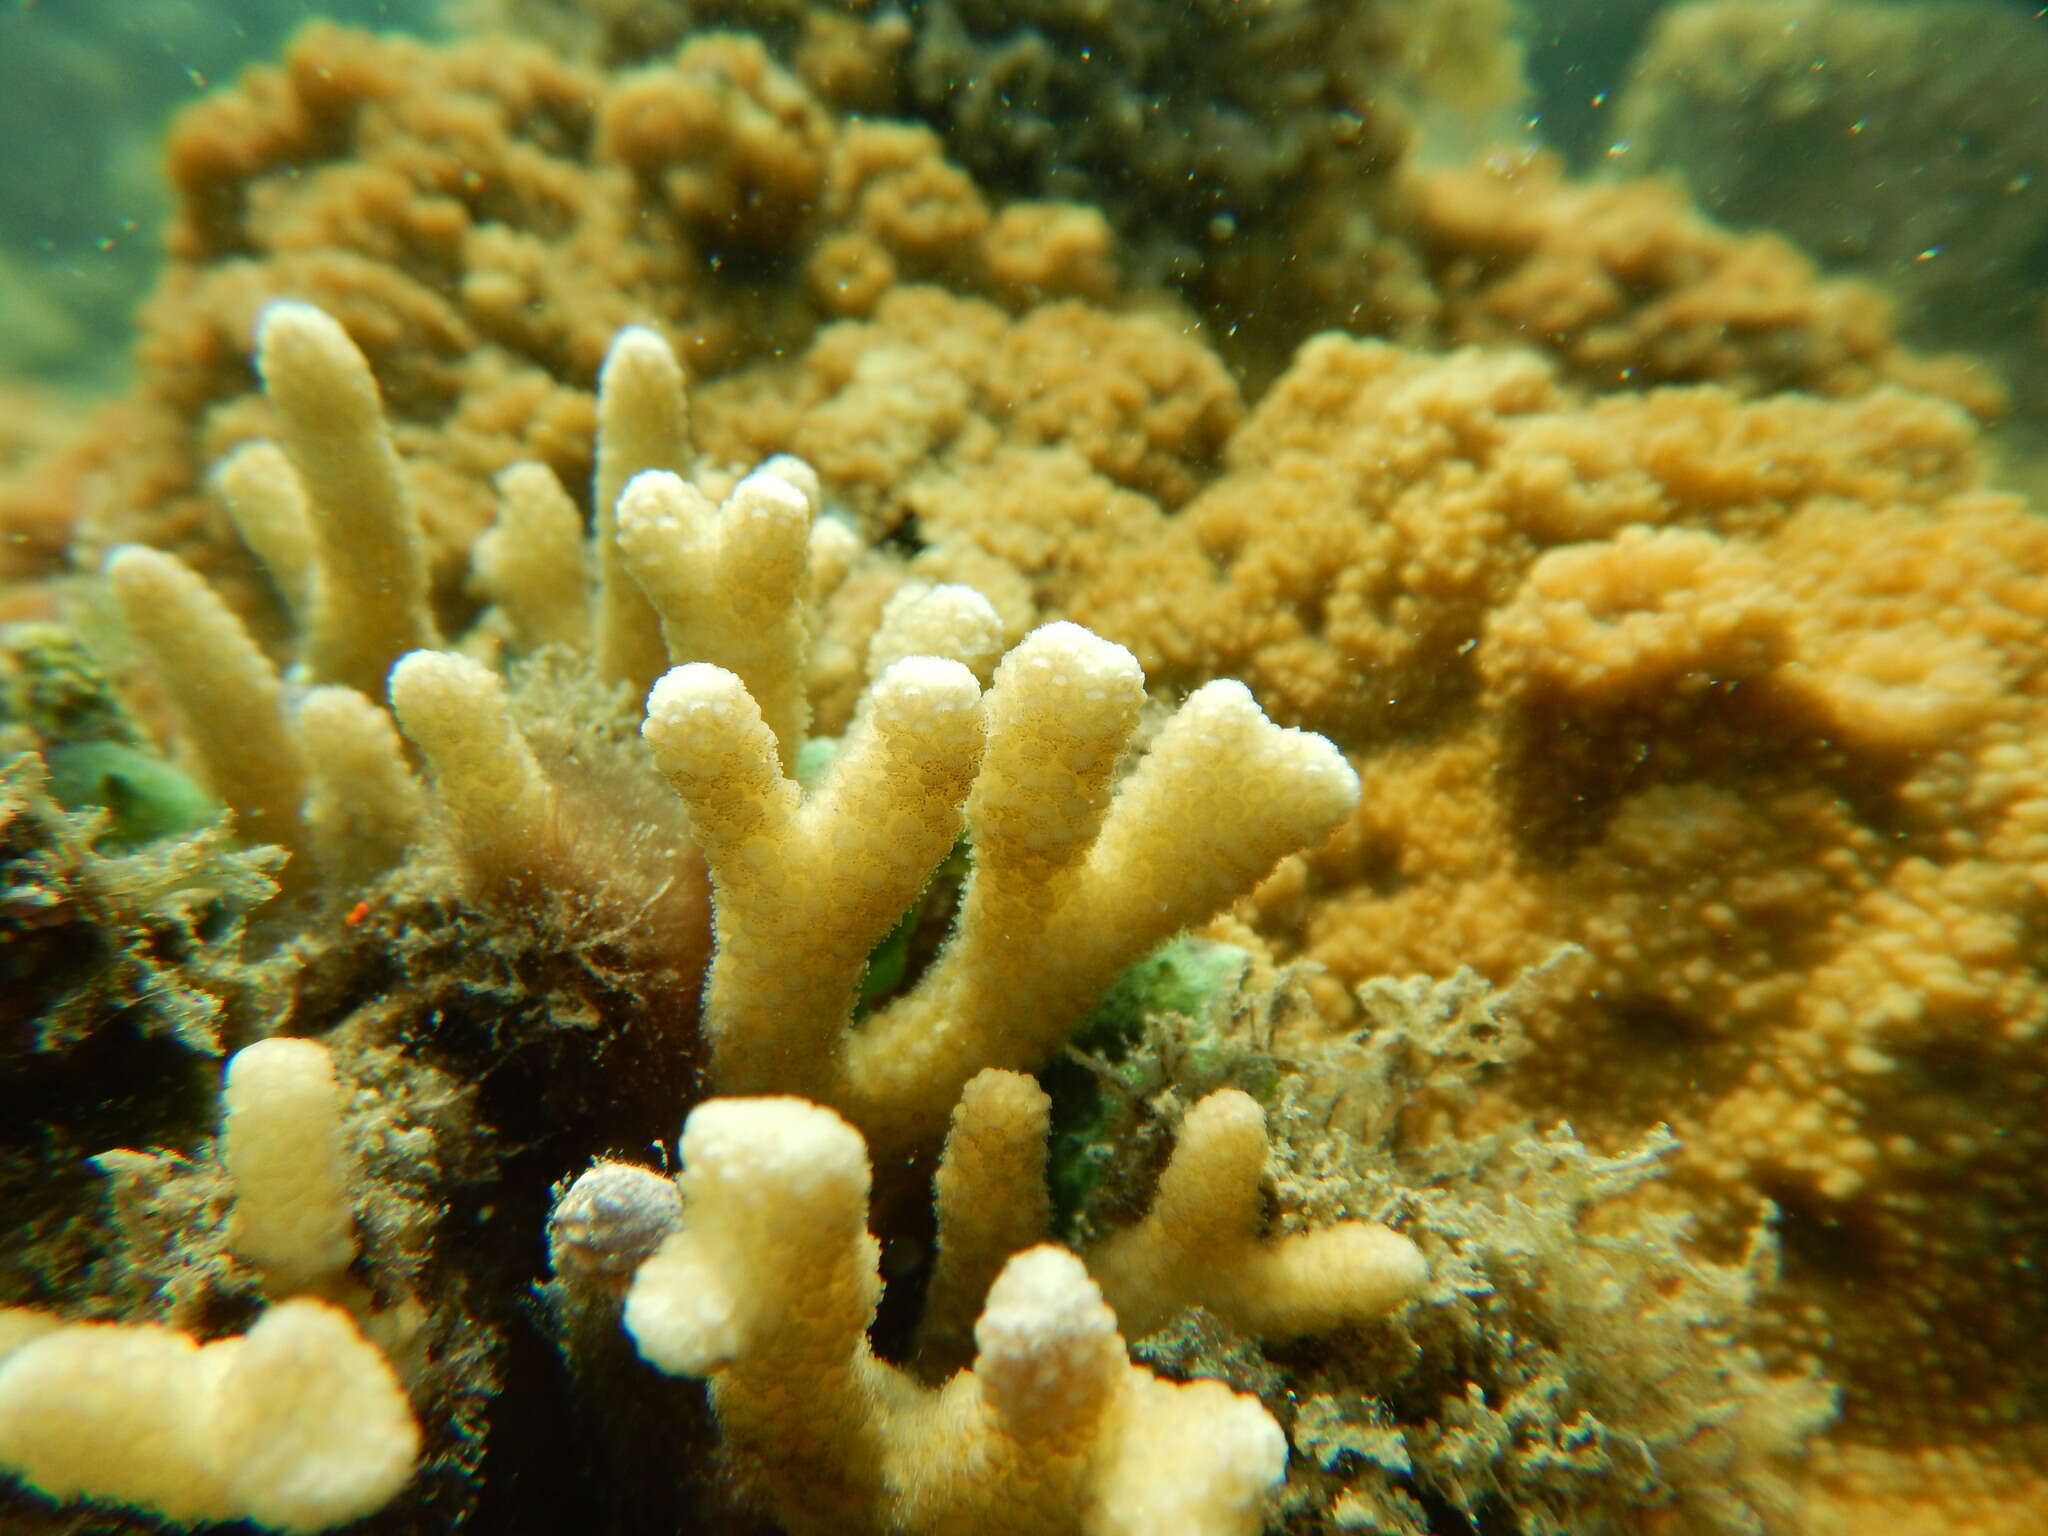 Image of Stylophora coral